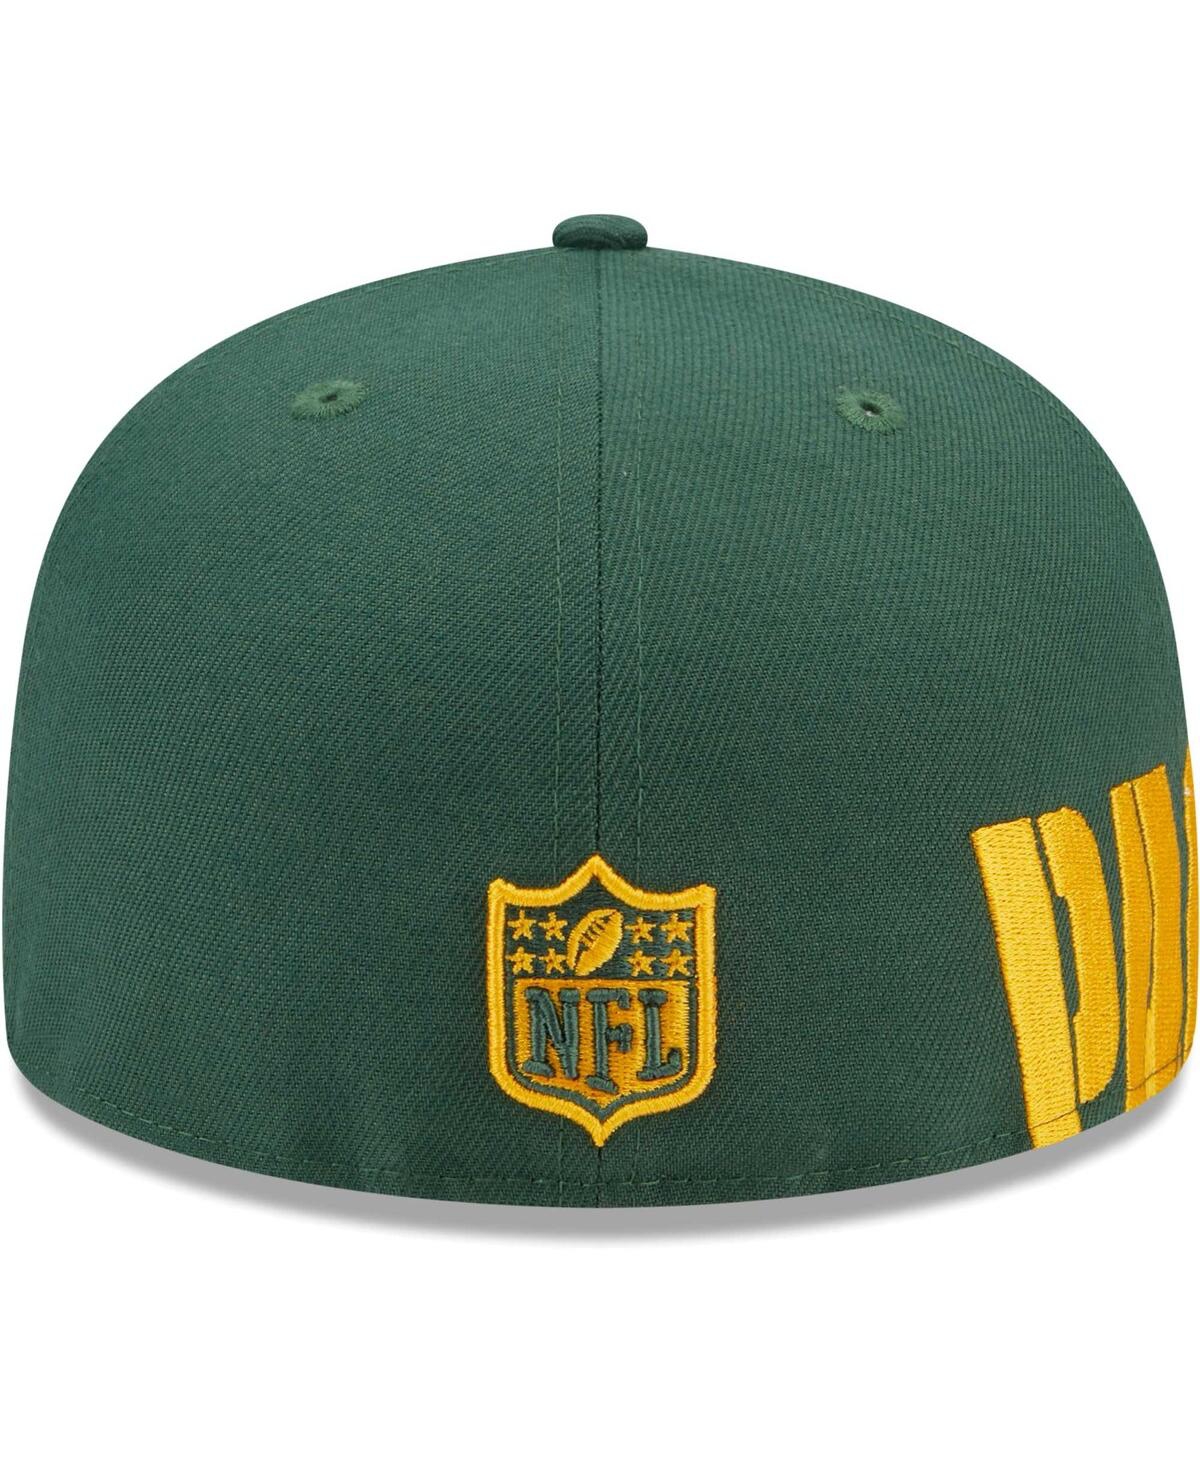 Shop New Era Men's  Green Green Bay Packers Arch 59fifty Fitted Hat